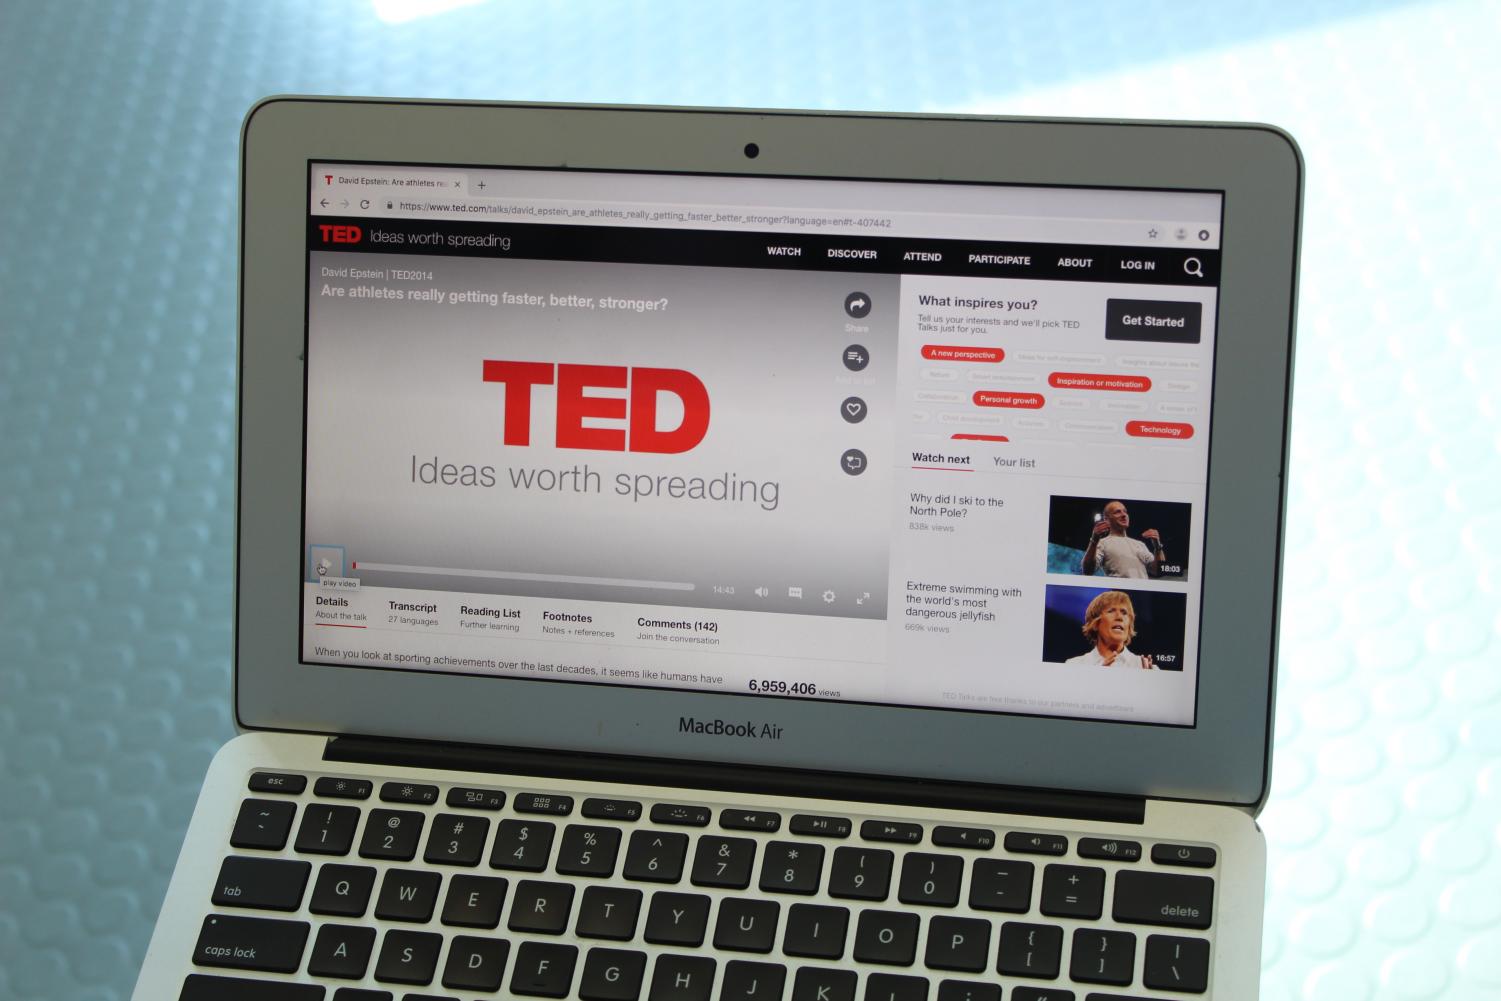 TED talks allow ideas to be spread to viewers. 